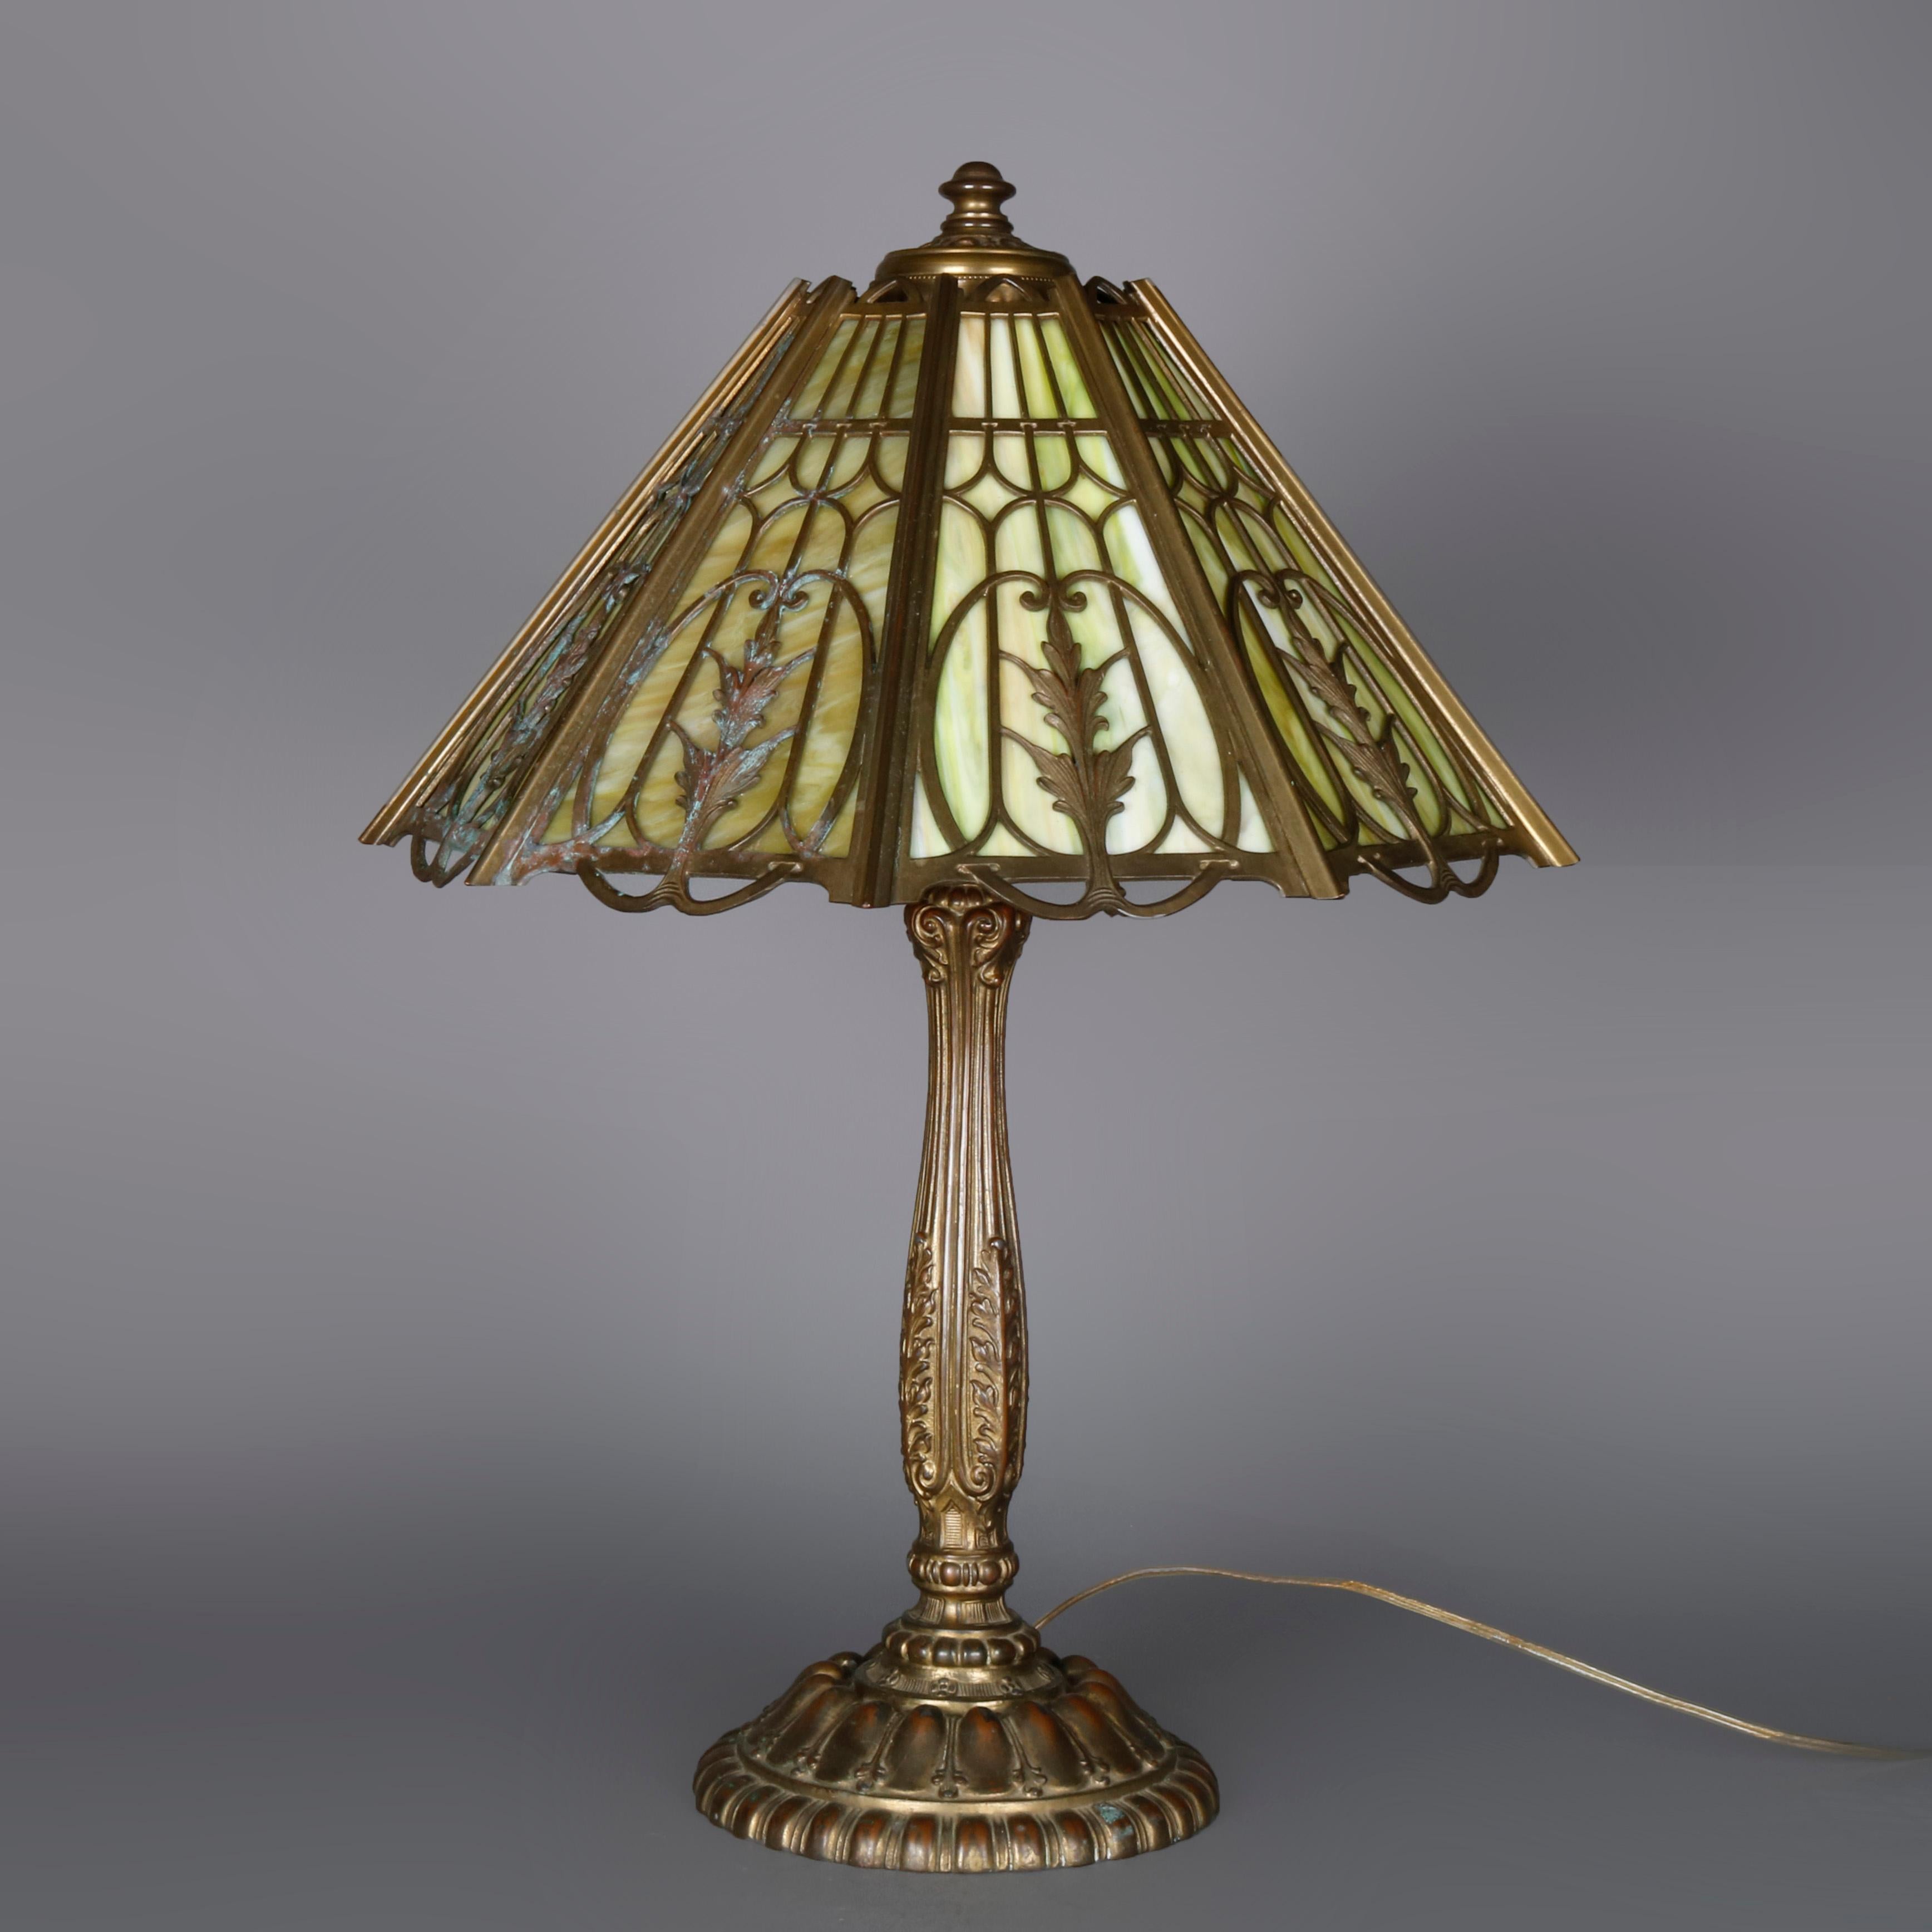 An antique Arts & Crafts table lamp by Wilkinson offers shade with cast bronze overlay with nine slag glass panels surmounting cast bronze base with three sockets and signed on base as photographed, circa 1910

***DELIVERY NOTICE – Due to COVID-19